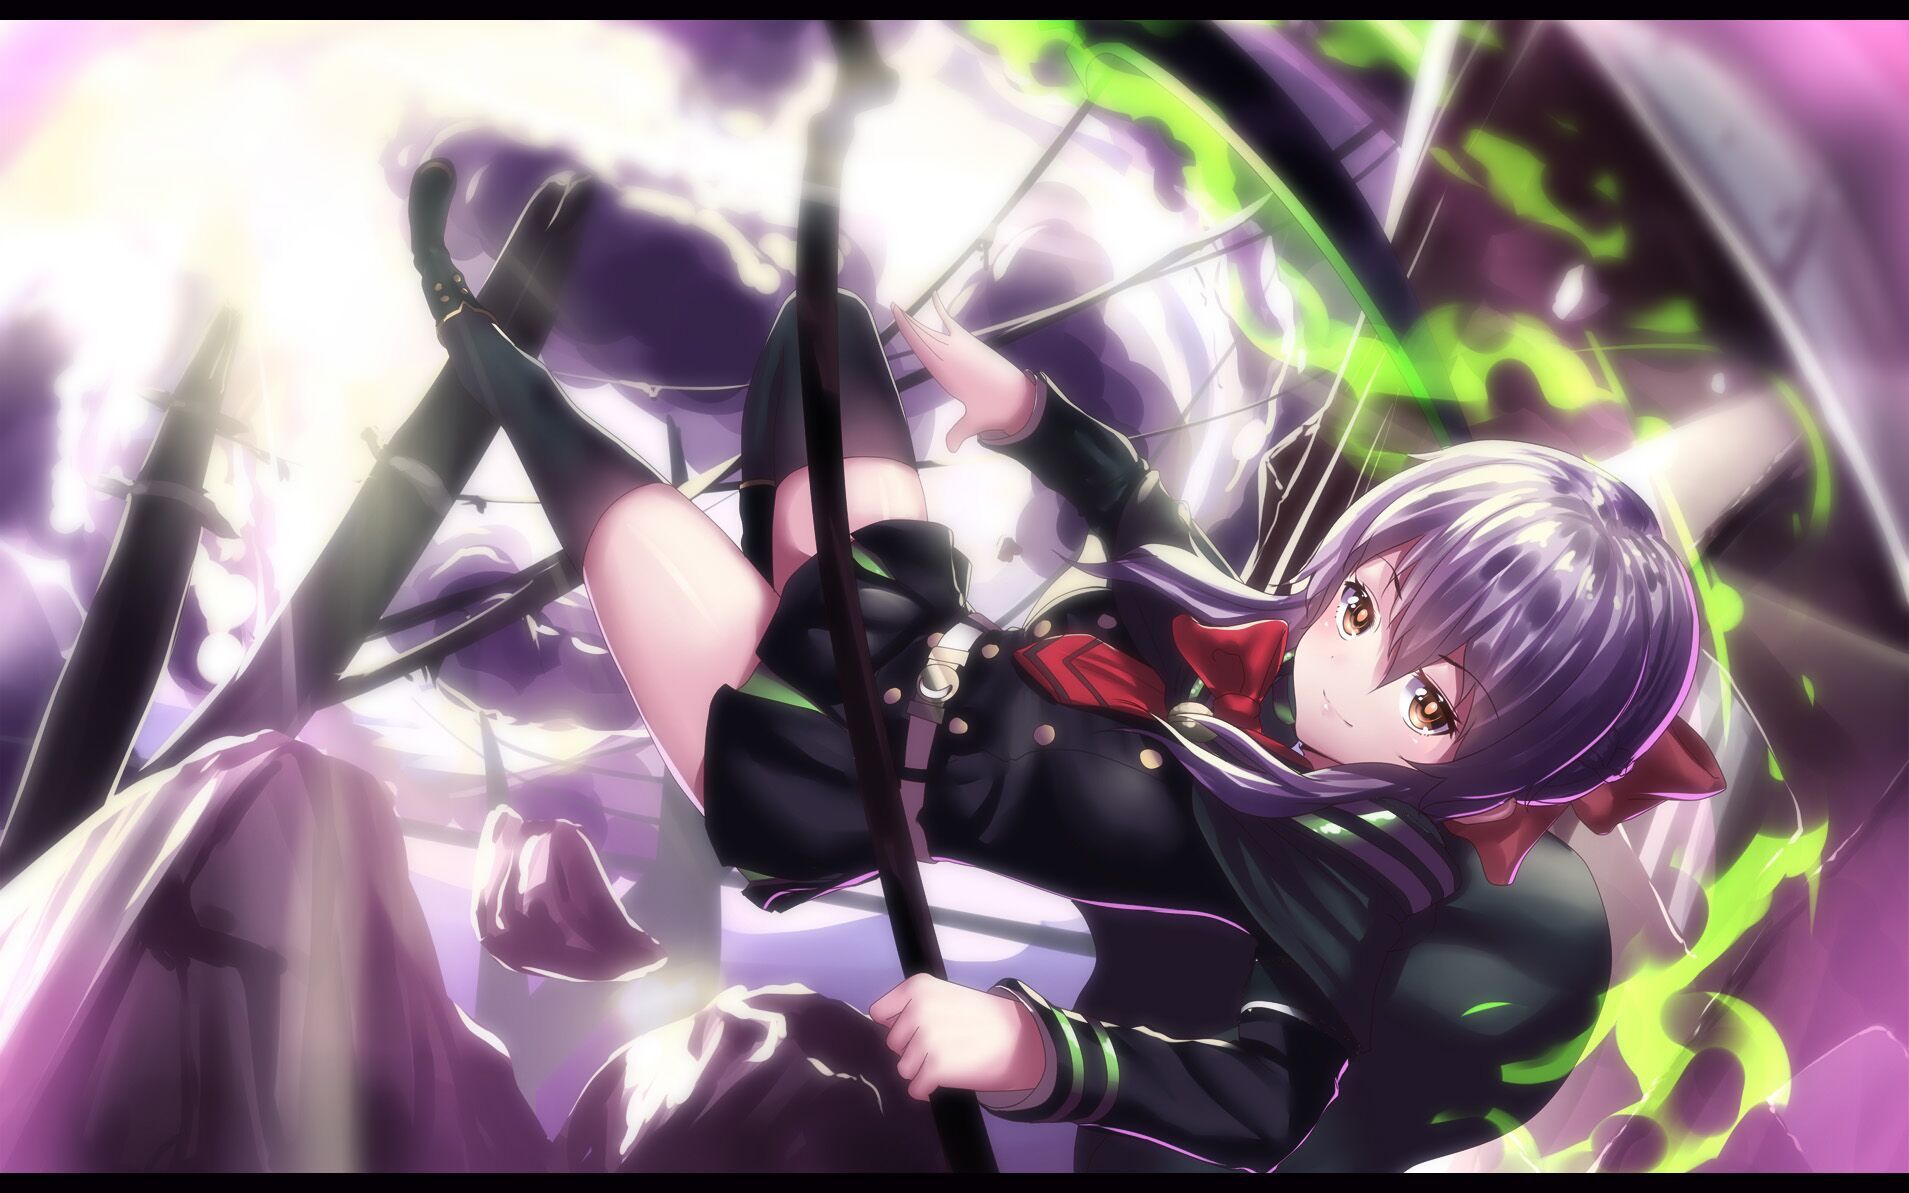 View, download, comment, and rate this 1909x1193 Seraph Of The End